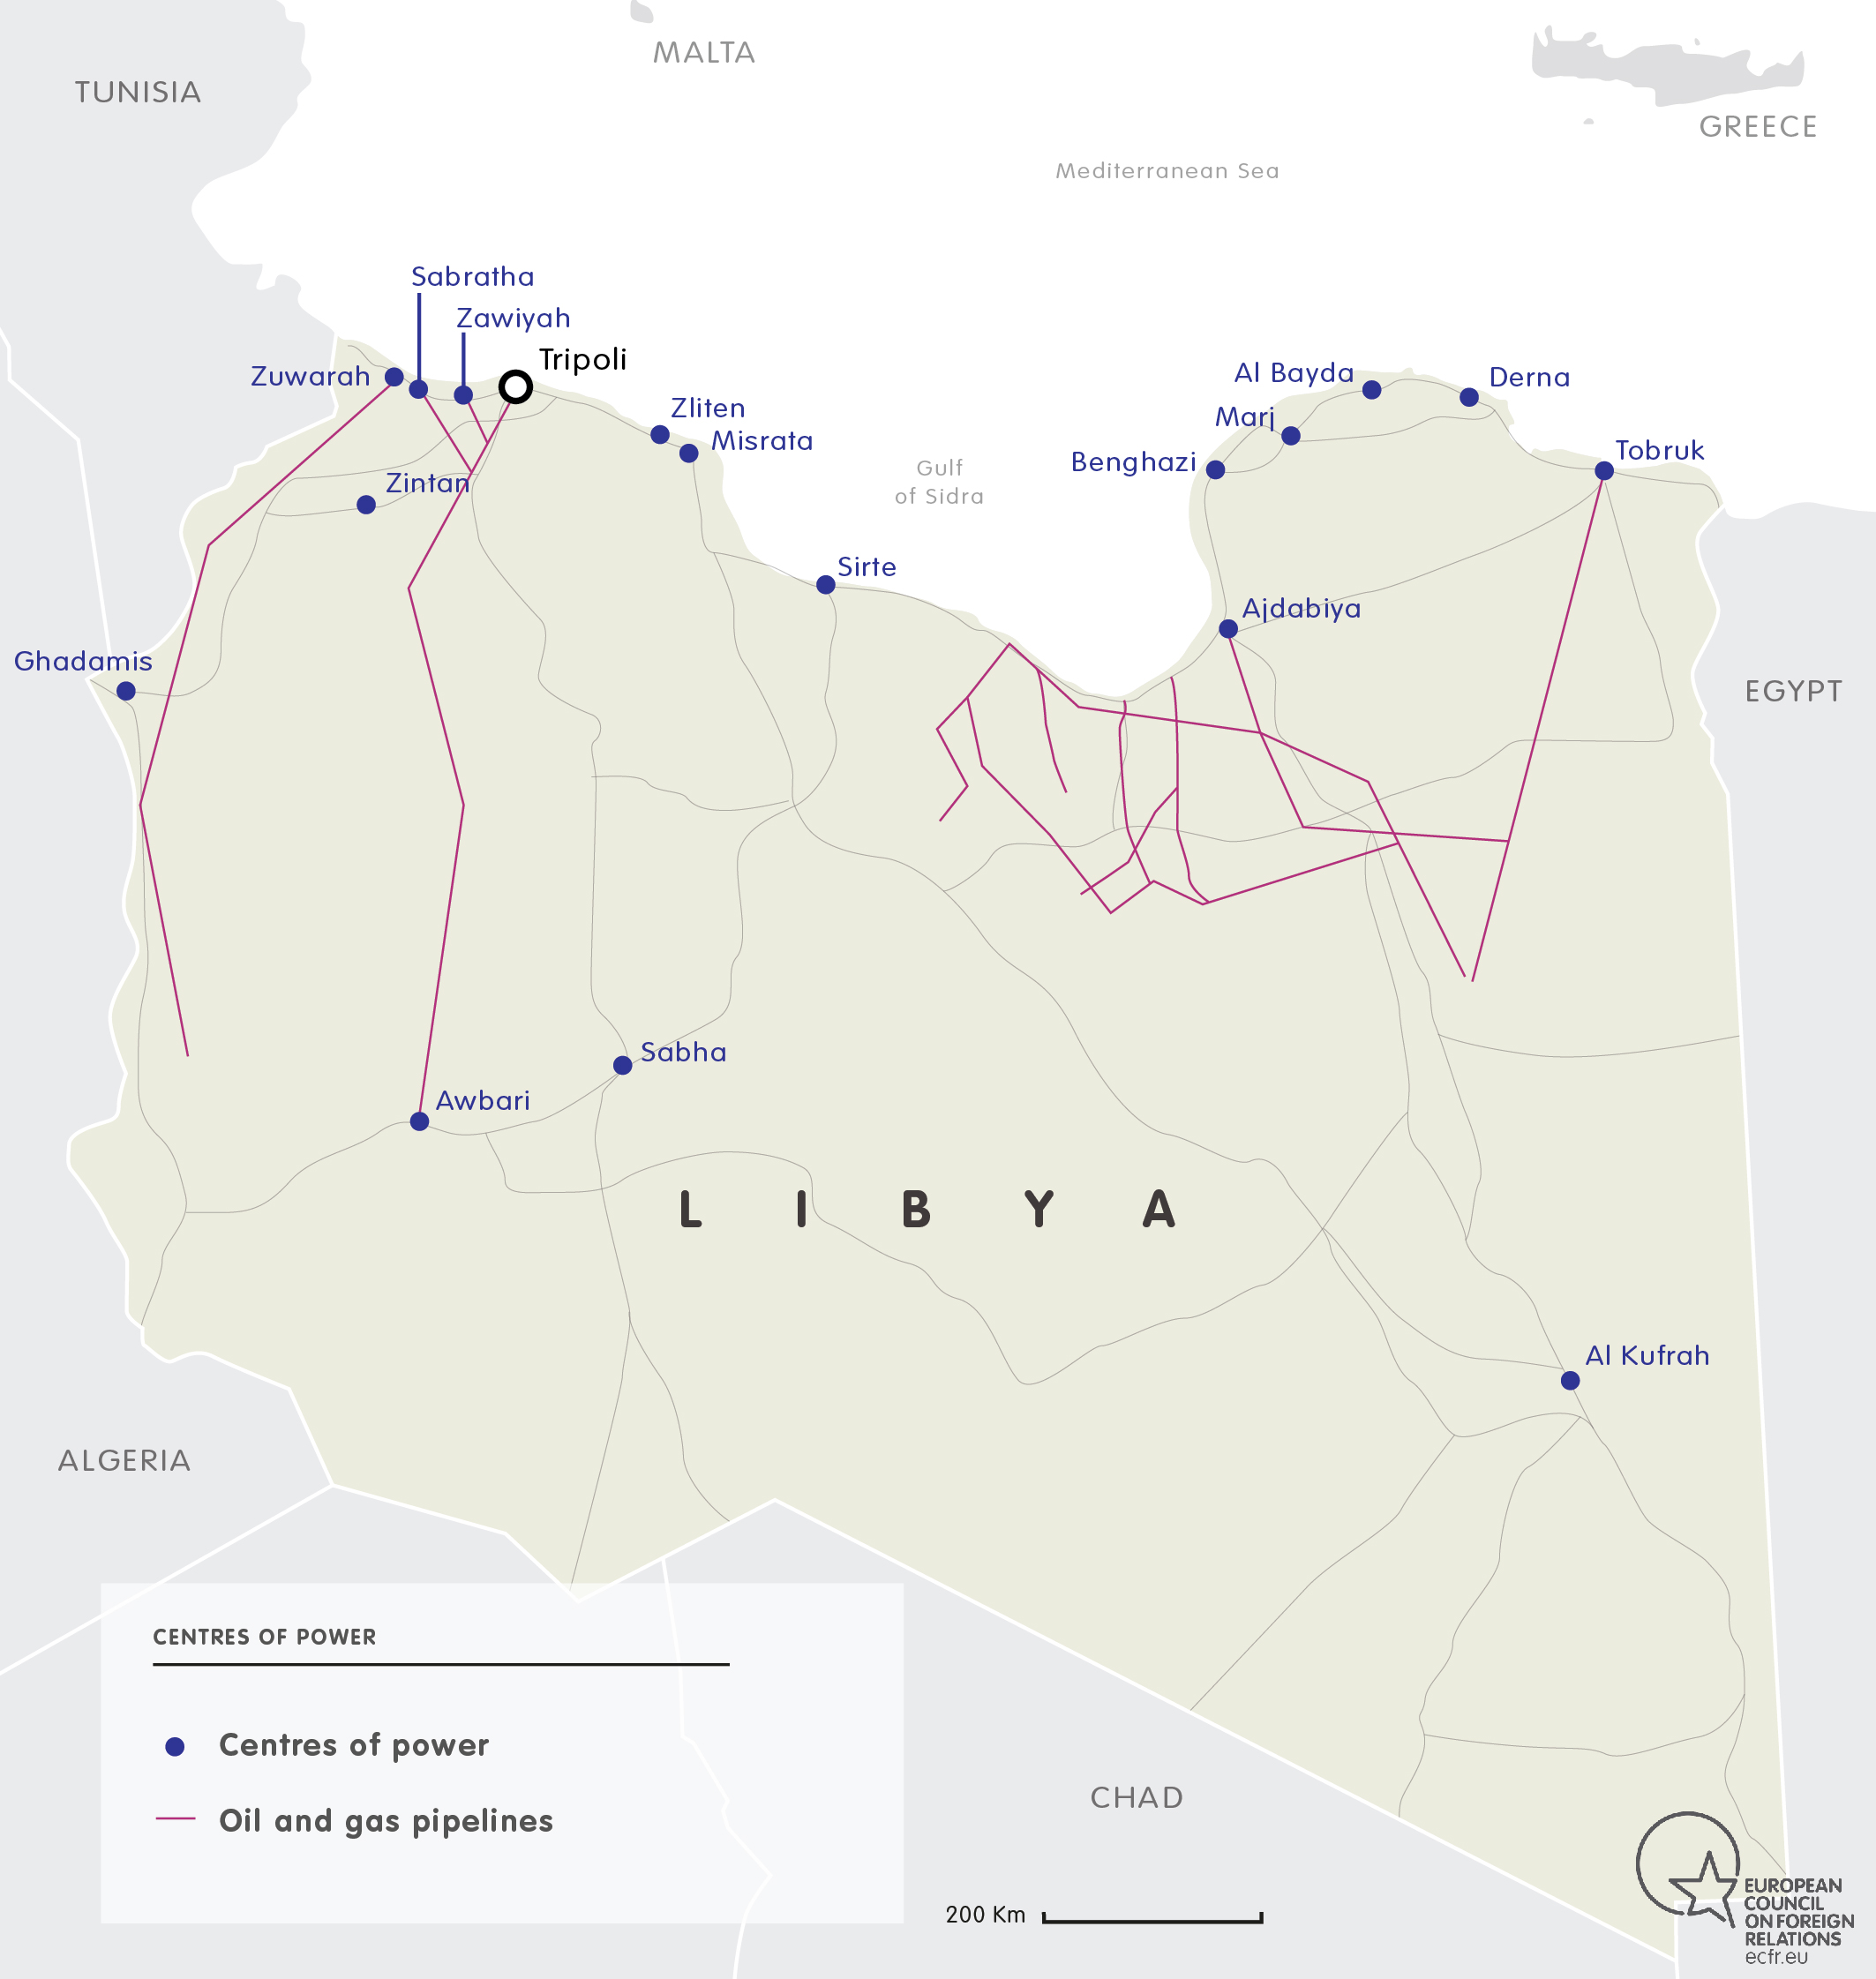 Map of oil & gas centres of power in Libya